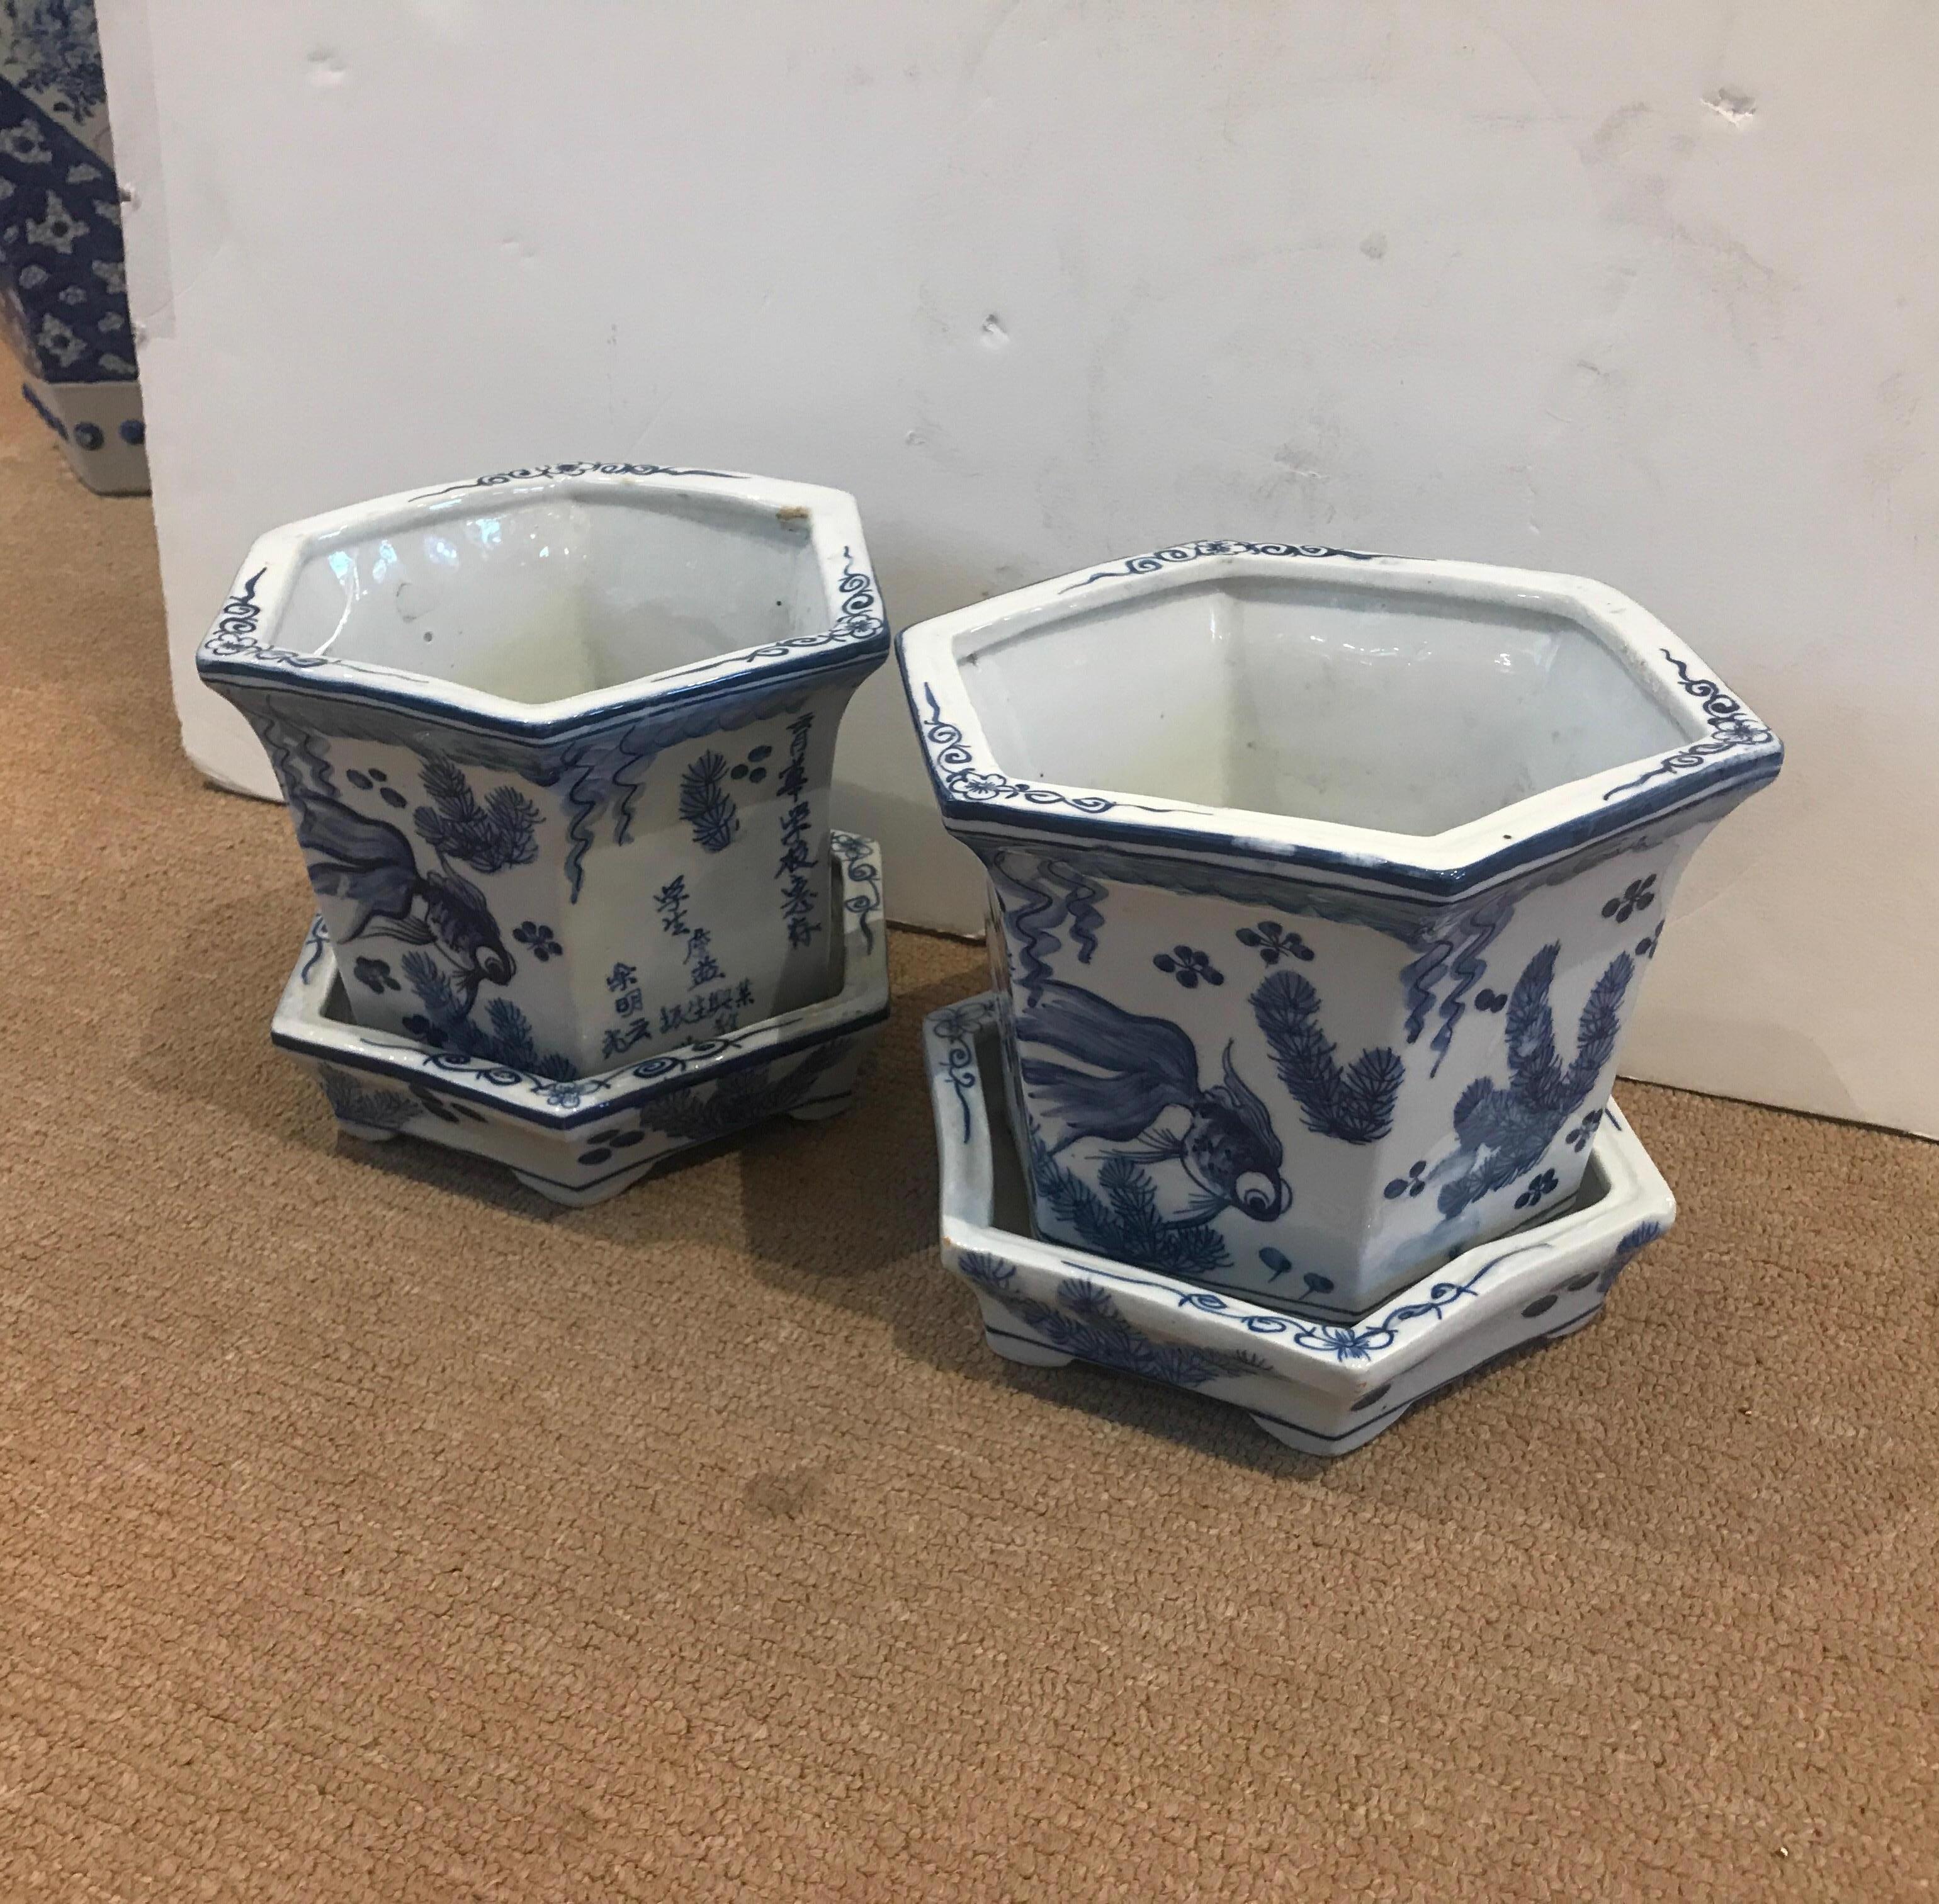 A Pair of antique Chinese blue and white hand painted porcelain cachepot planters with underplates. The white porcelain background with blue decoration of Koi fish.